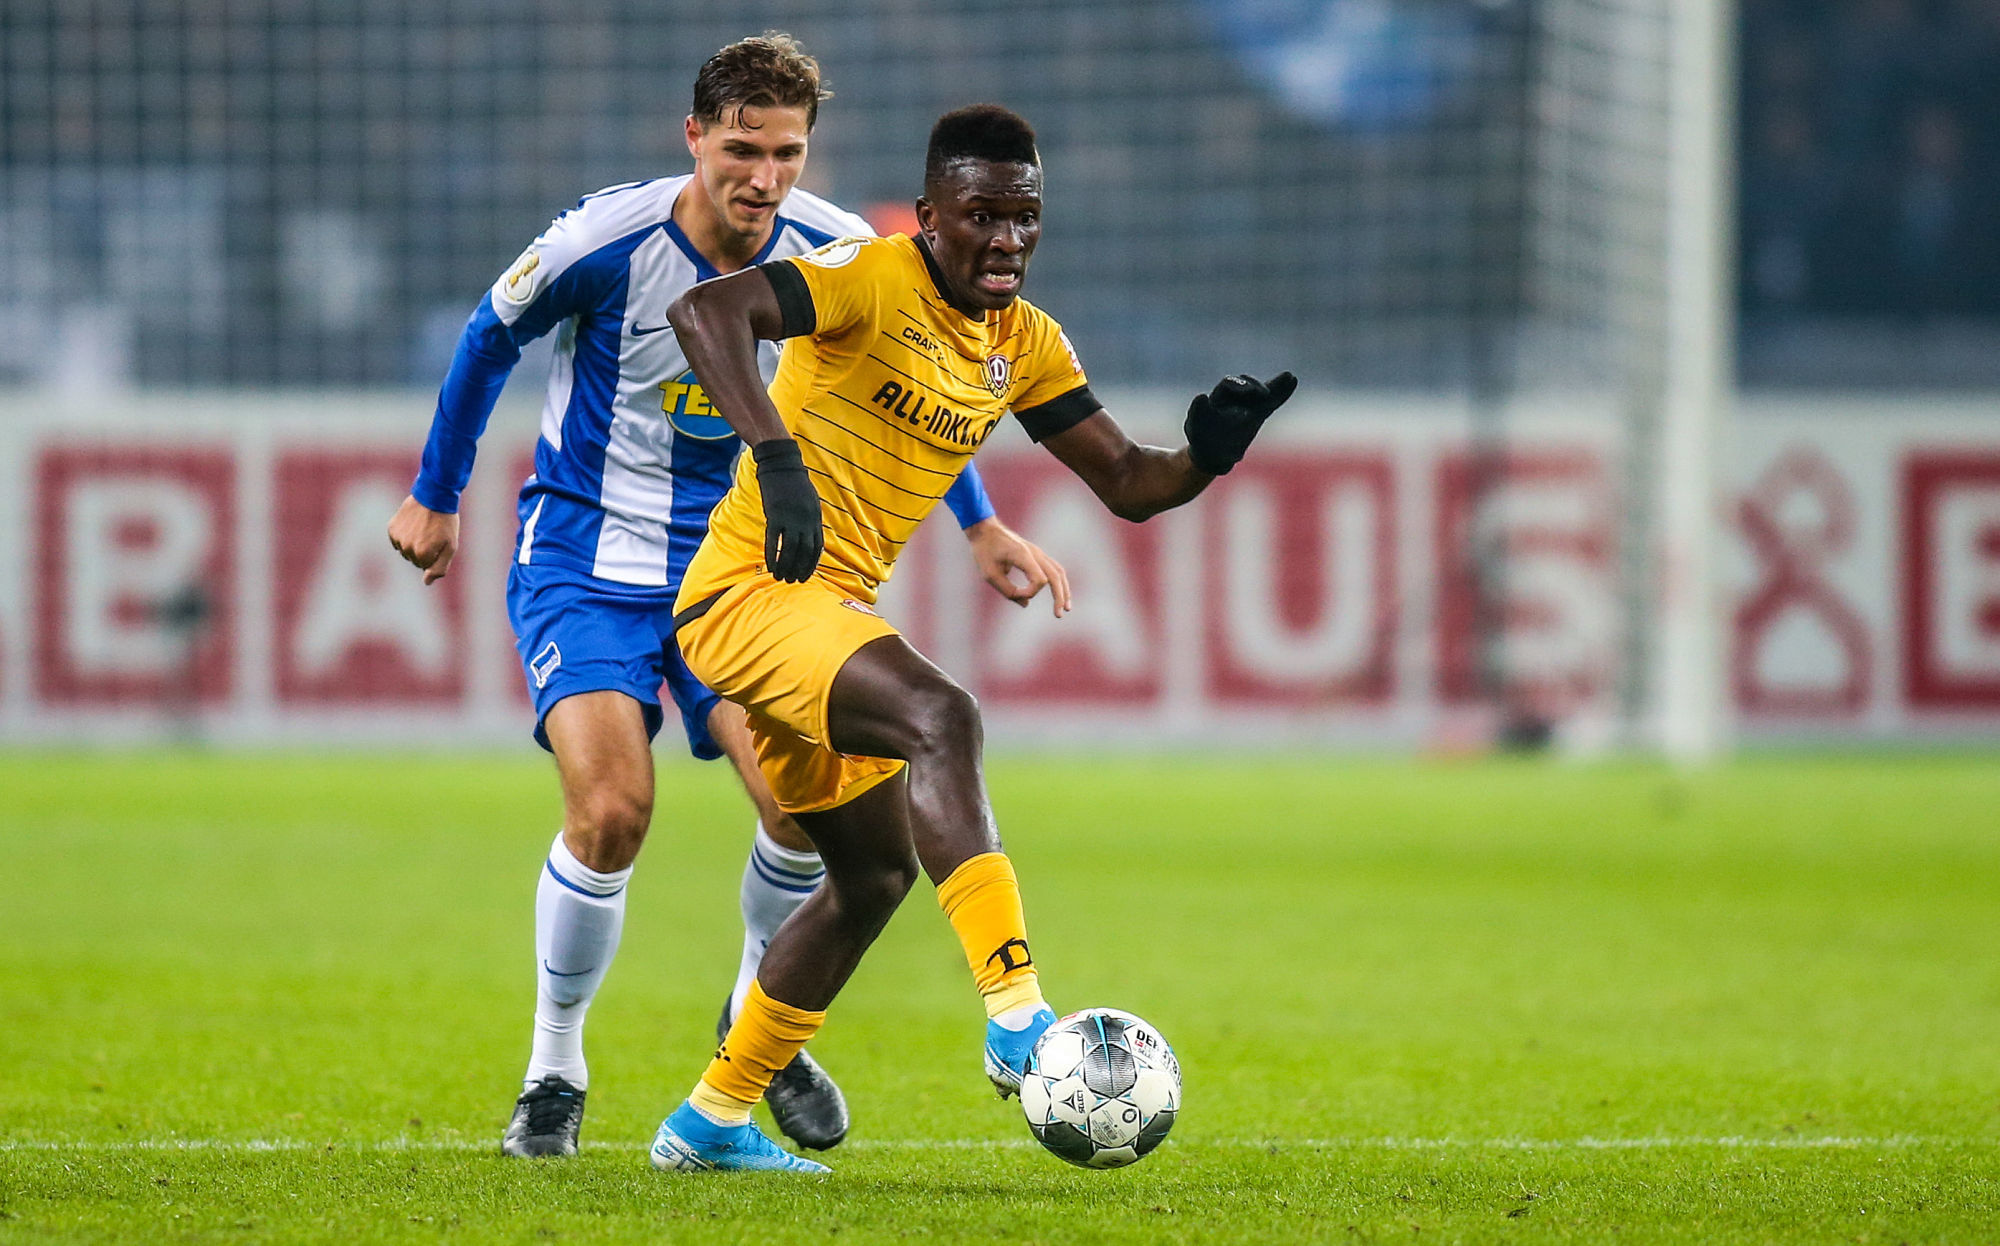 30 October 2019, Berlin: Soccer: DFB Cup, Hertha BSC - Dynamo Dresden, 2nd round, Olympic Stadium. Berlin's Niklas Stark (l) fights against Moussa Kone of Dynamo Dresden for the ball. Photo: Andreas Gora/dpa - IMPORTANT NOTE: In accordance with the requirements of the DFL Deutsche Fu?ball Liga or the DFB Deutscher Fu?ball-Bund, it is prohibited to use or have used photographs taken in the stadium and/or the match in the form of sequence images and/or video-like photo sequences. 

Photo by Icon Sport - Niklas STARK - Moussa KONE - Berlin (Allemagne)